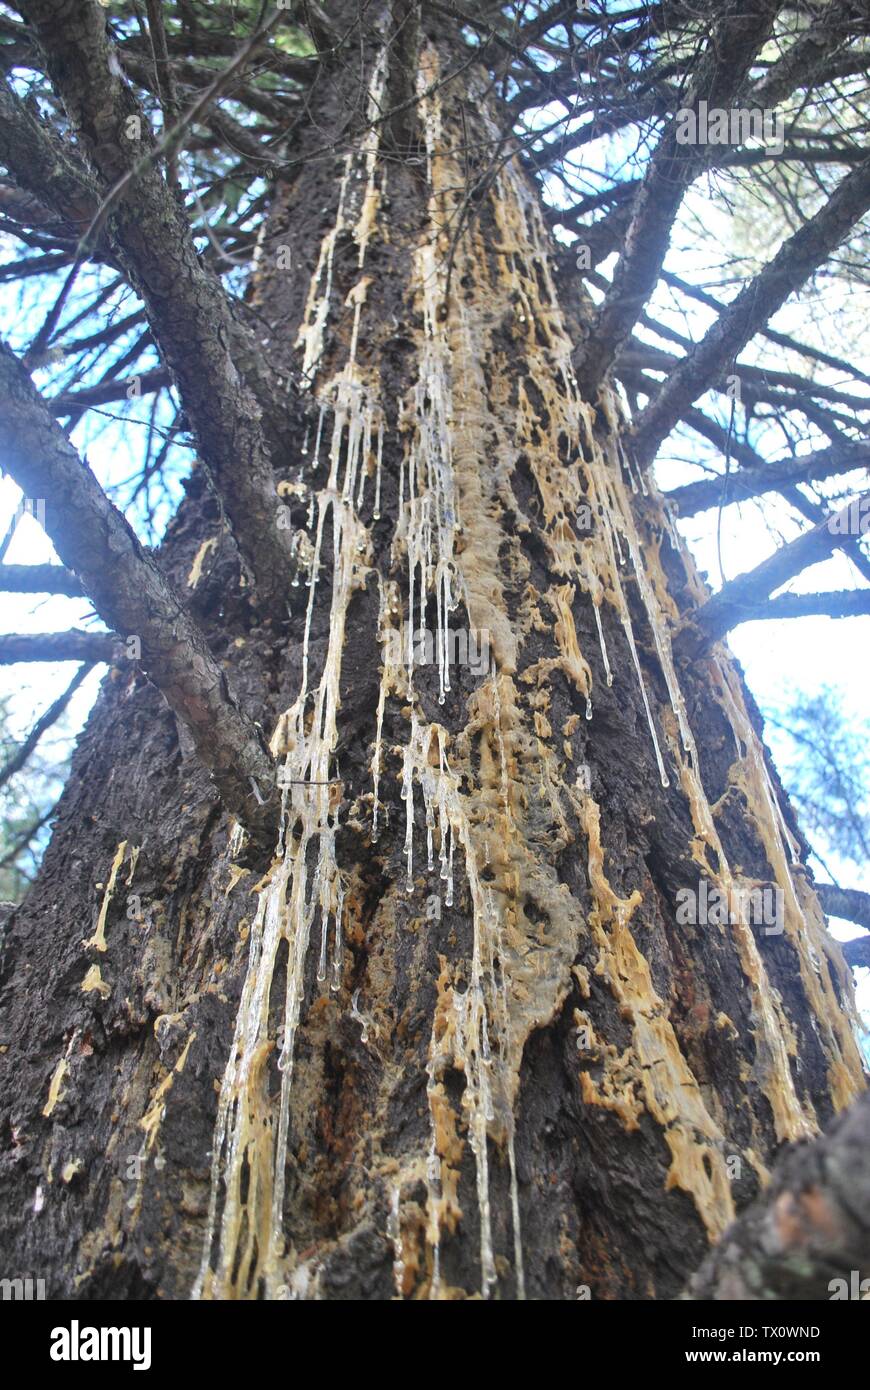 Sap streaming from the trunk of a Douglas fir tree Stock Photo